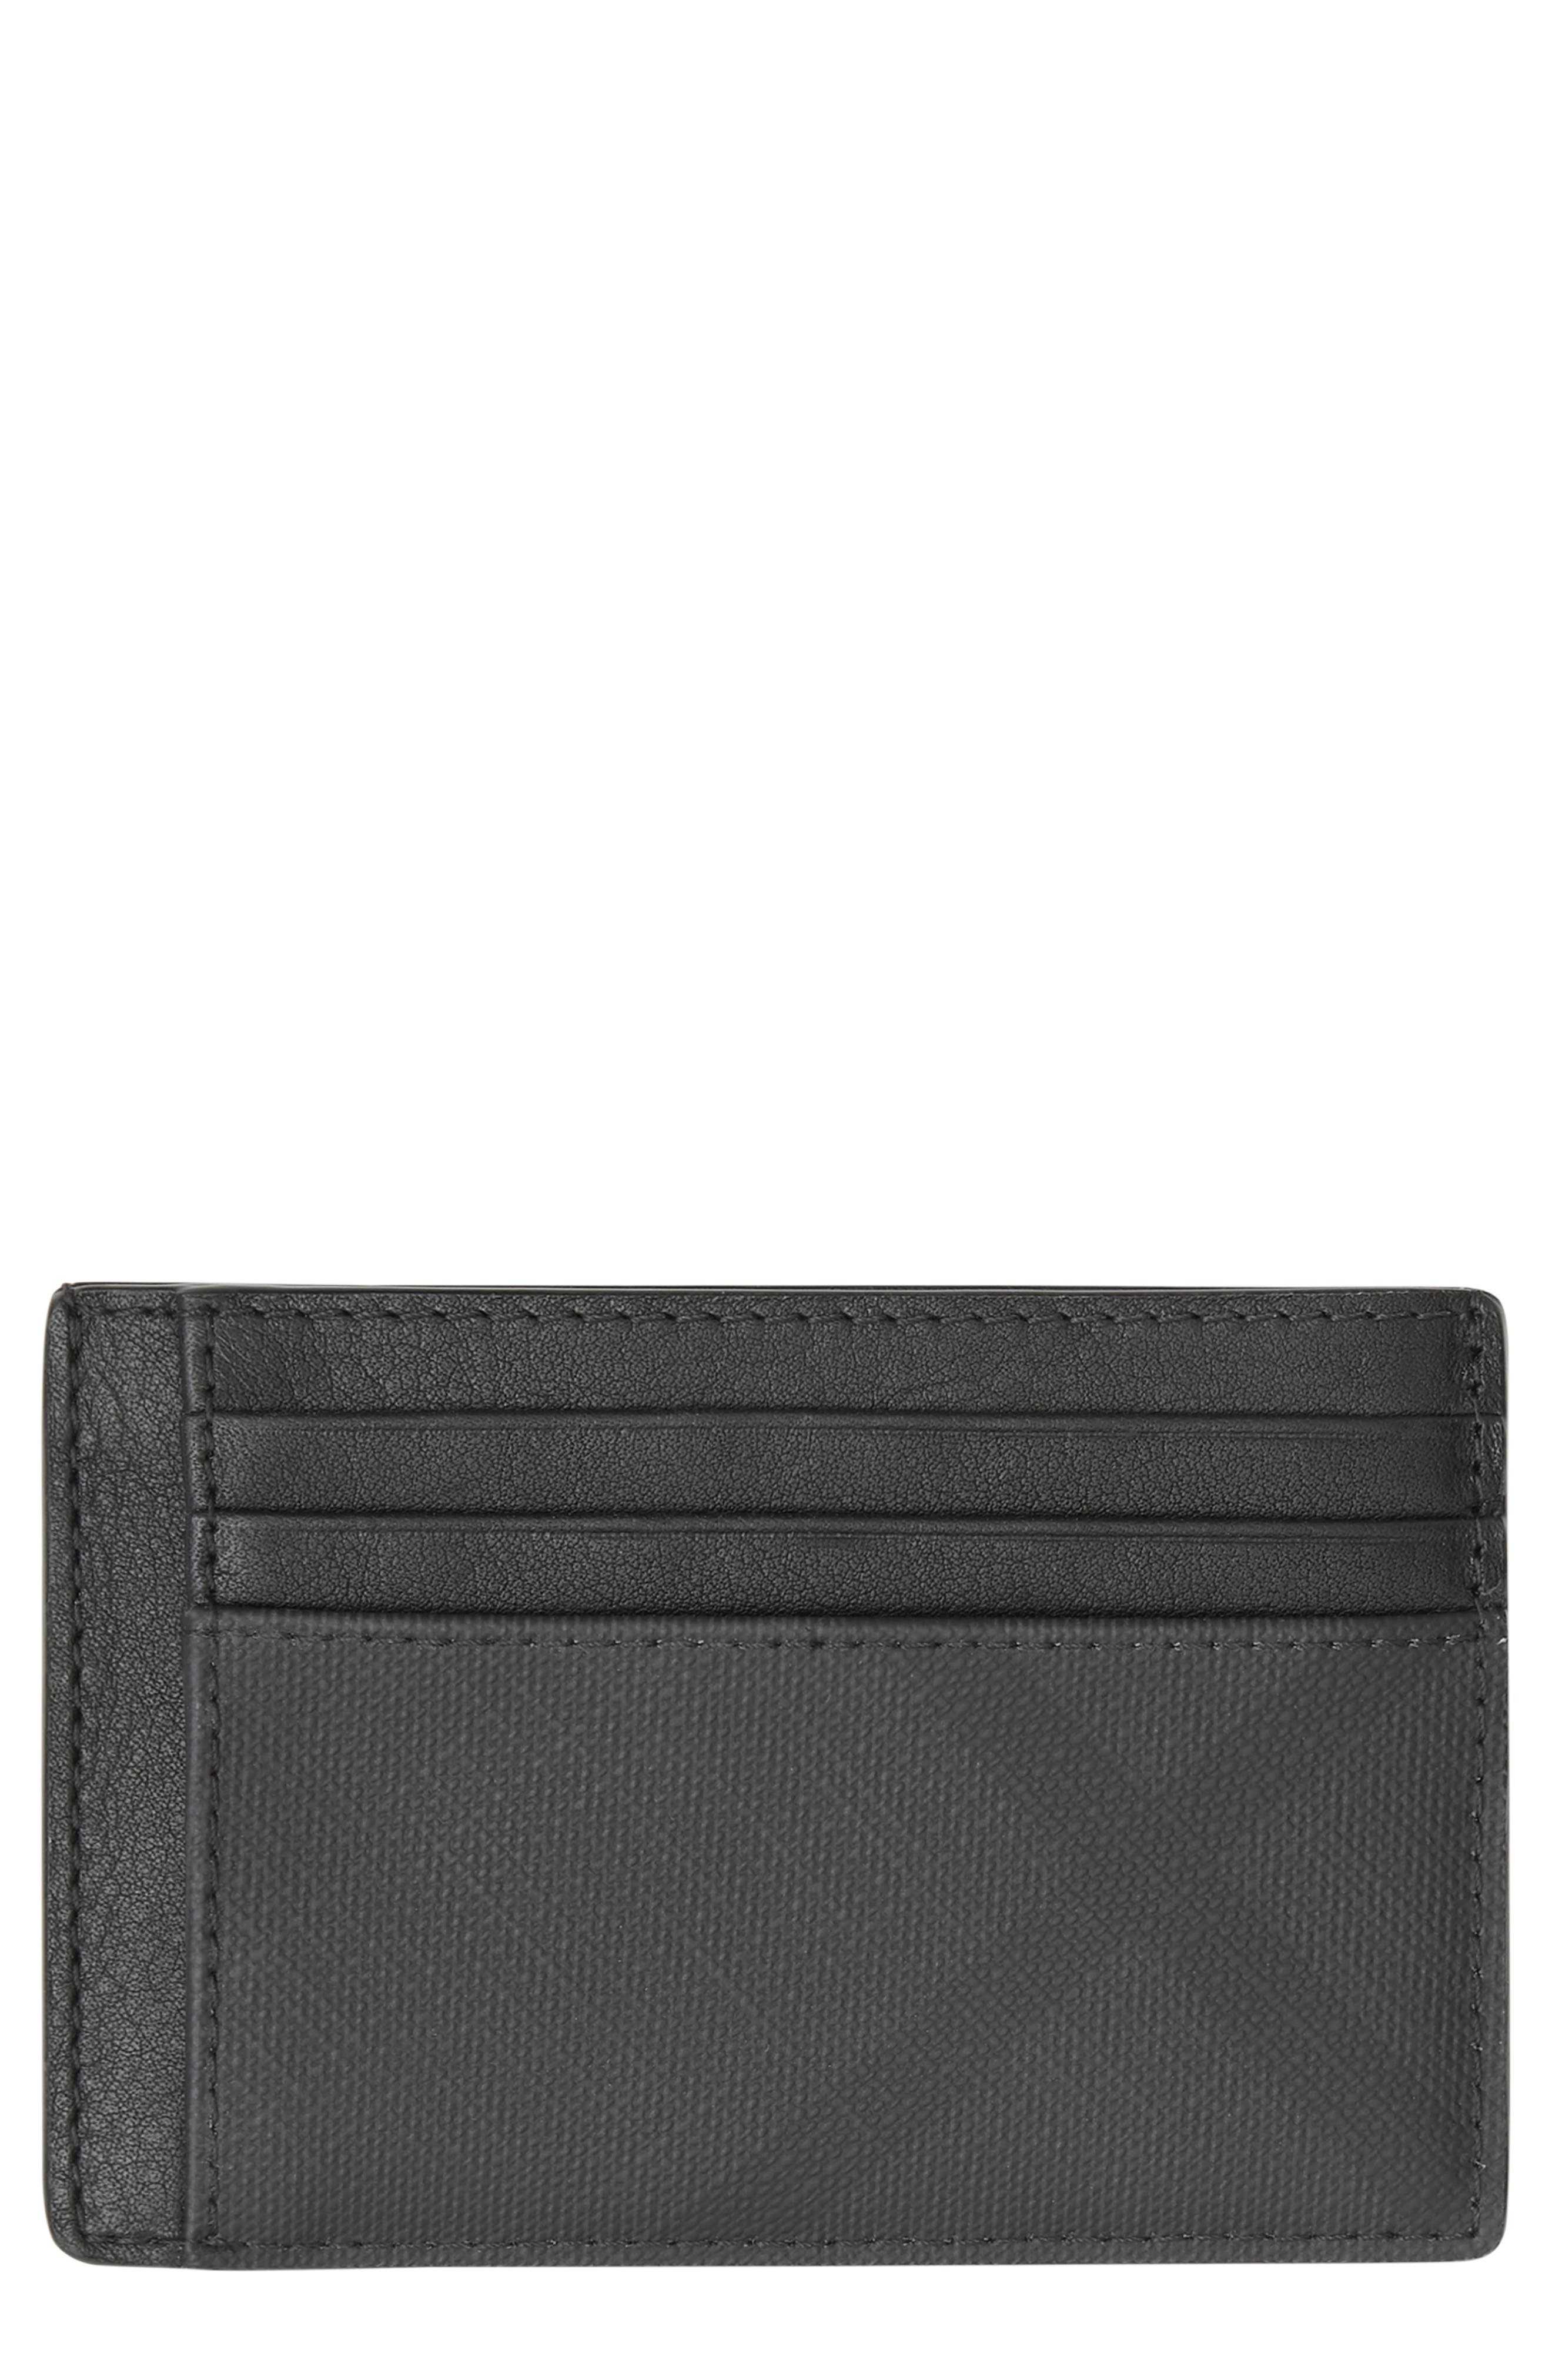 Burberry Chase London Check Card Case in Black at Nordstrom